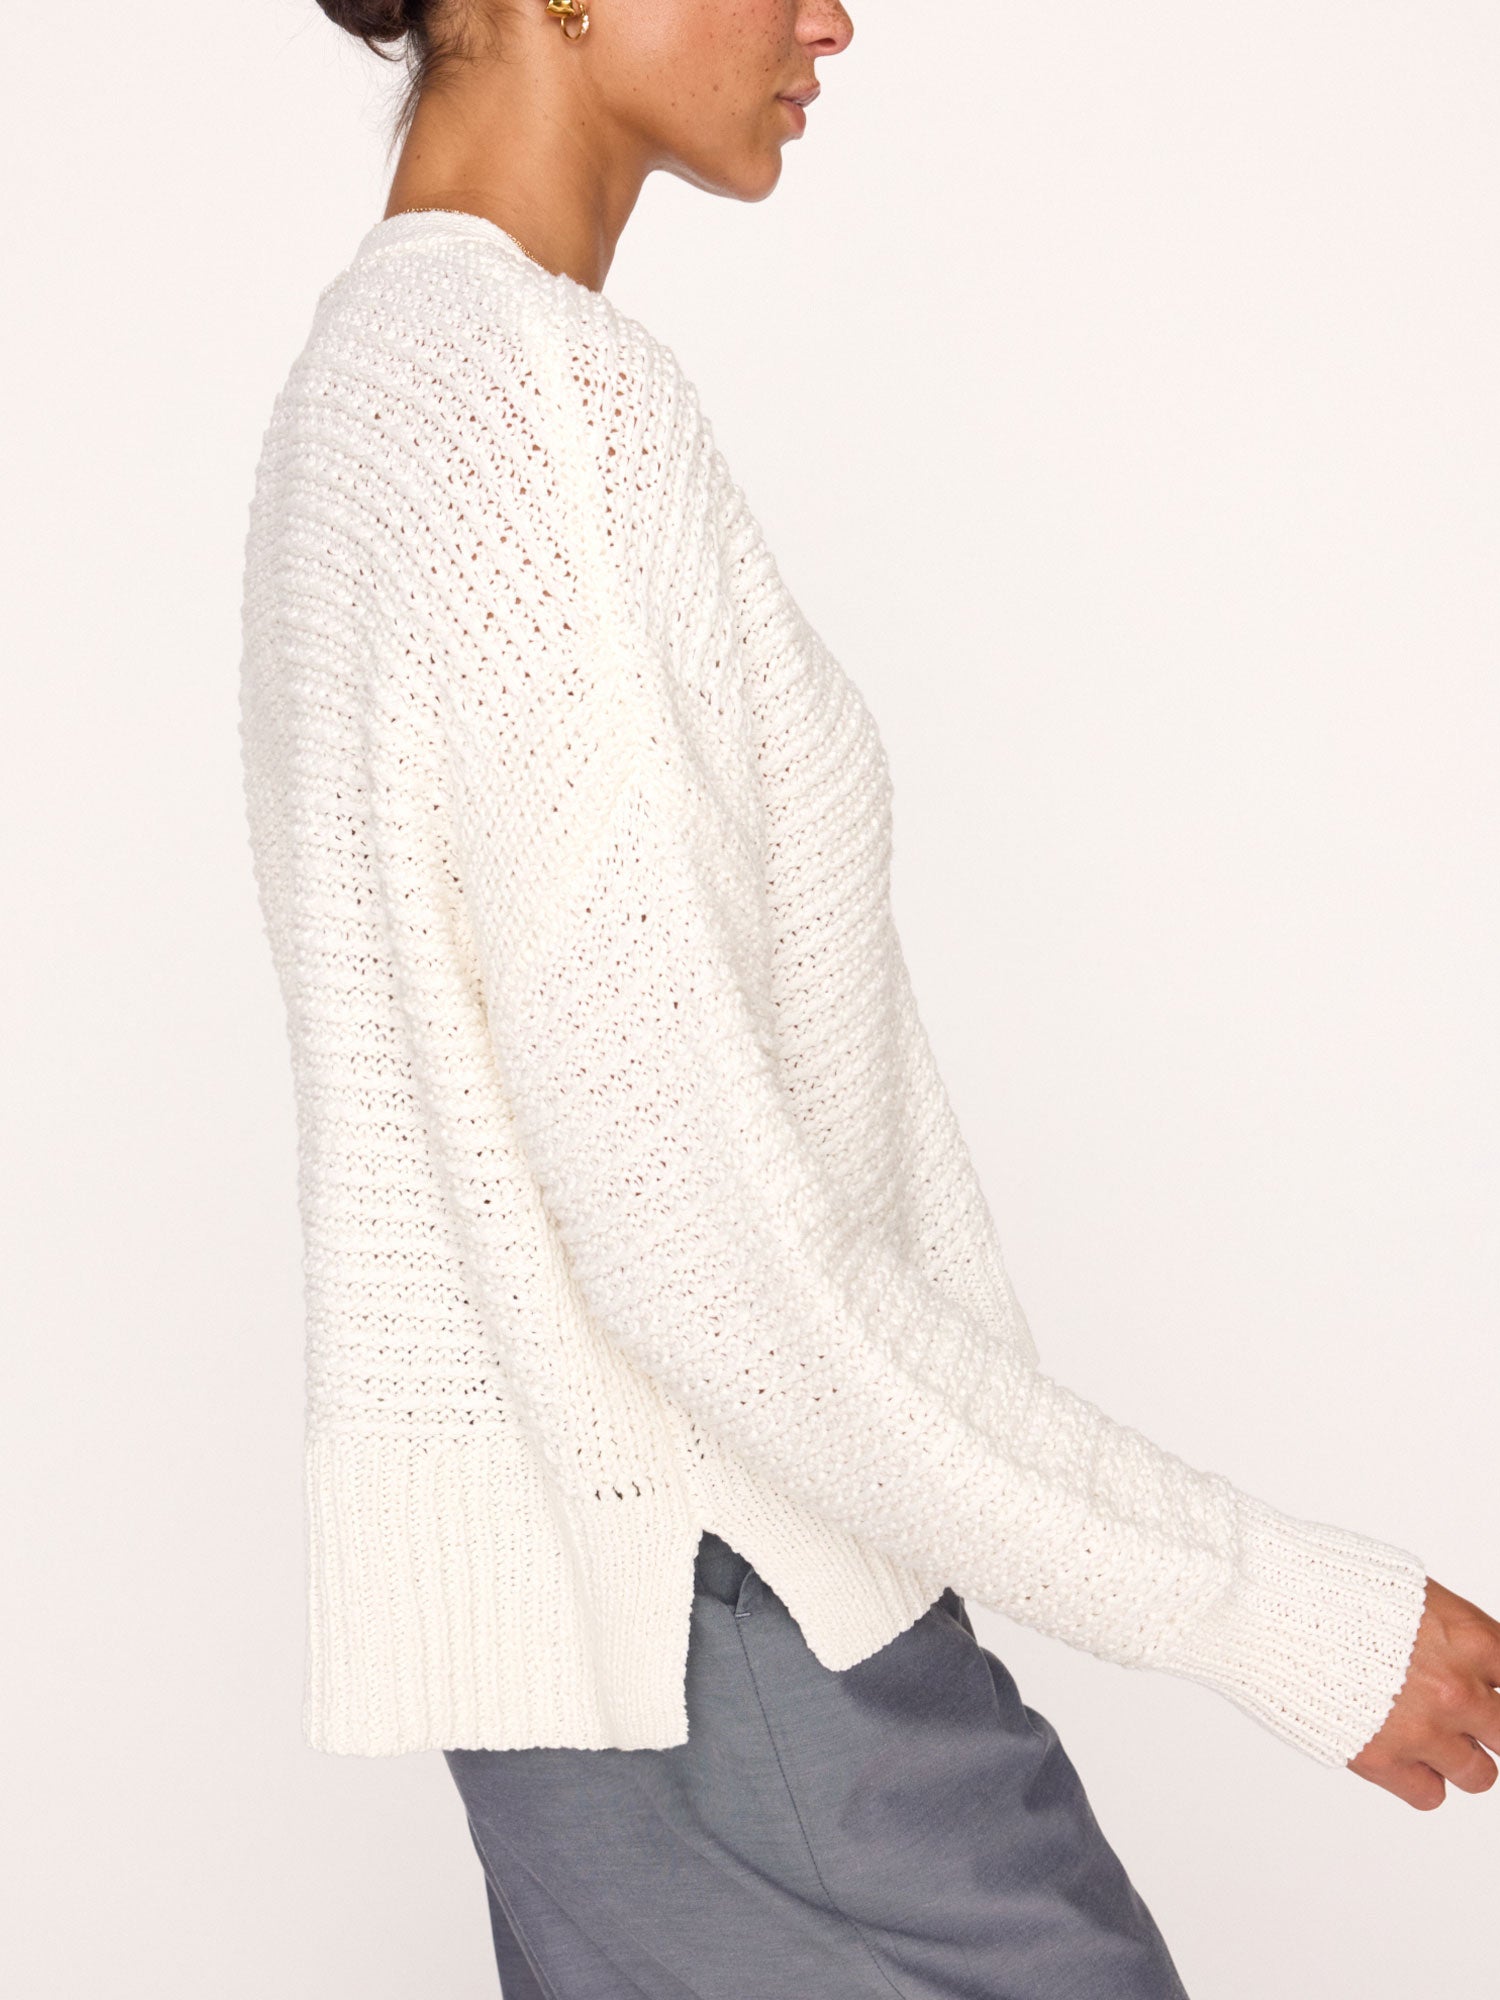 Sia cotton white cardigan sweater side view